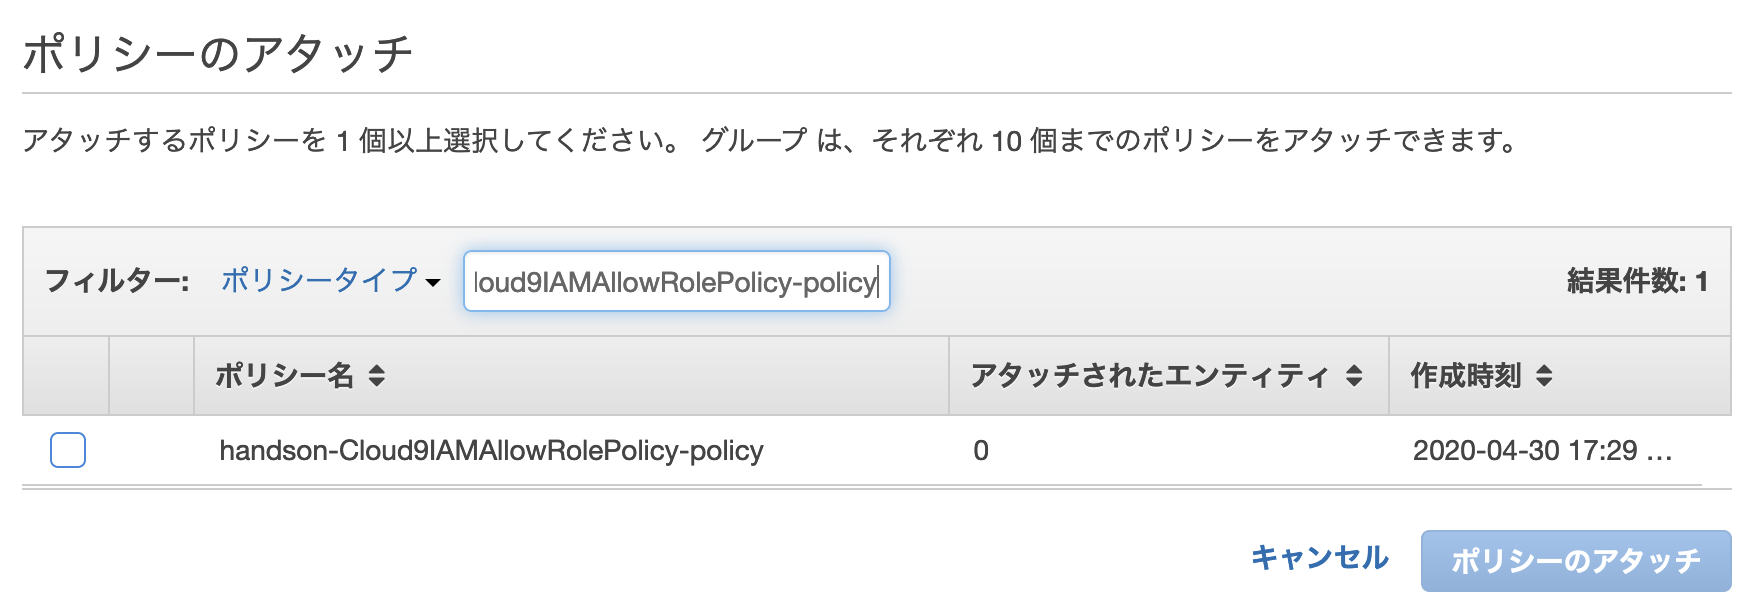 _images/_set-detail-tab_policies-case-handson-cloud9-Cloud9IAMAllowRolePolicy.png